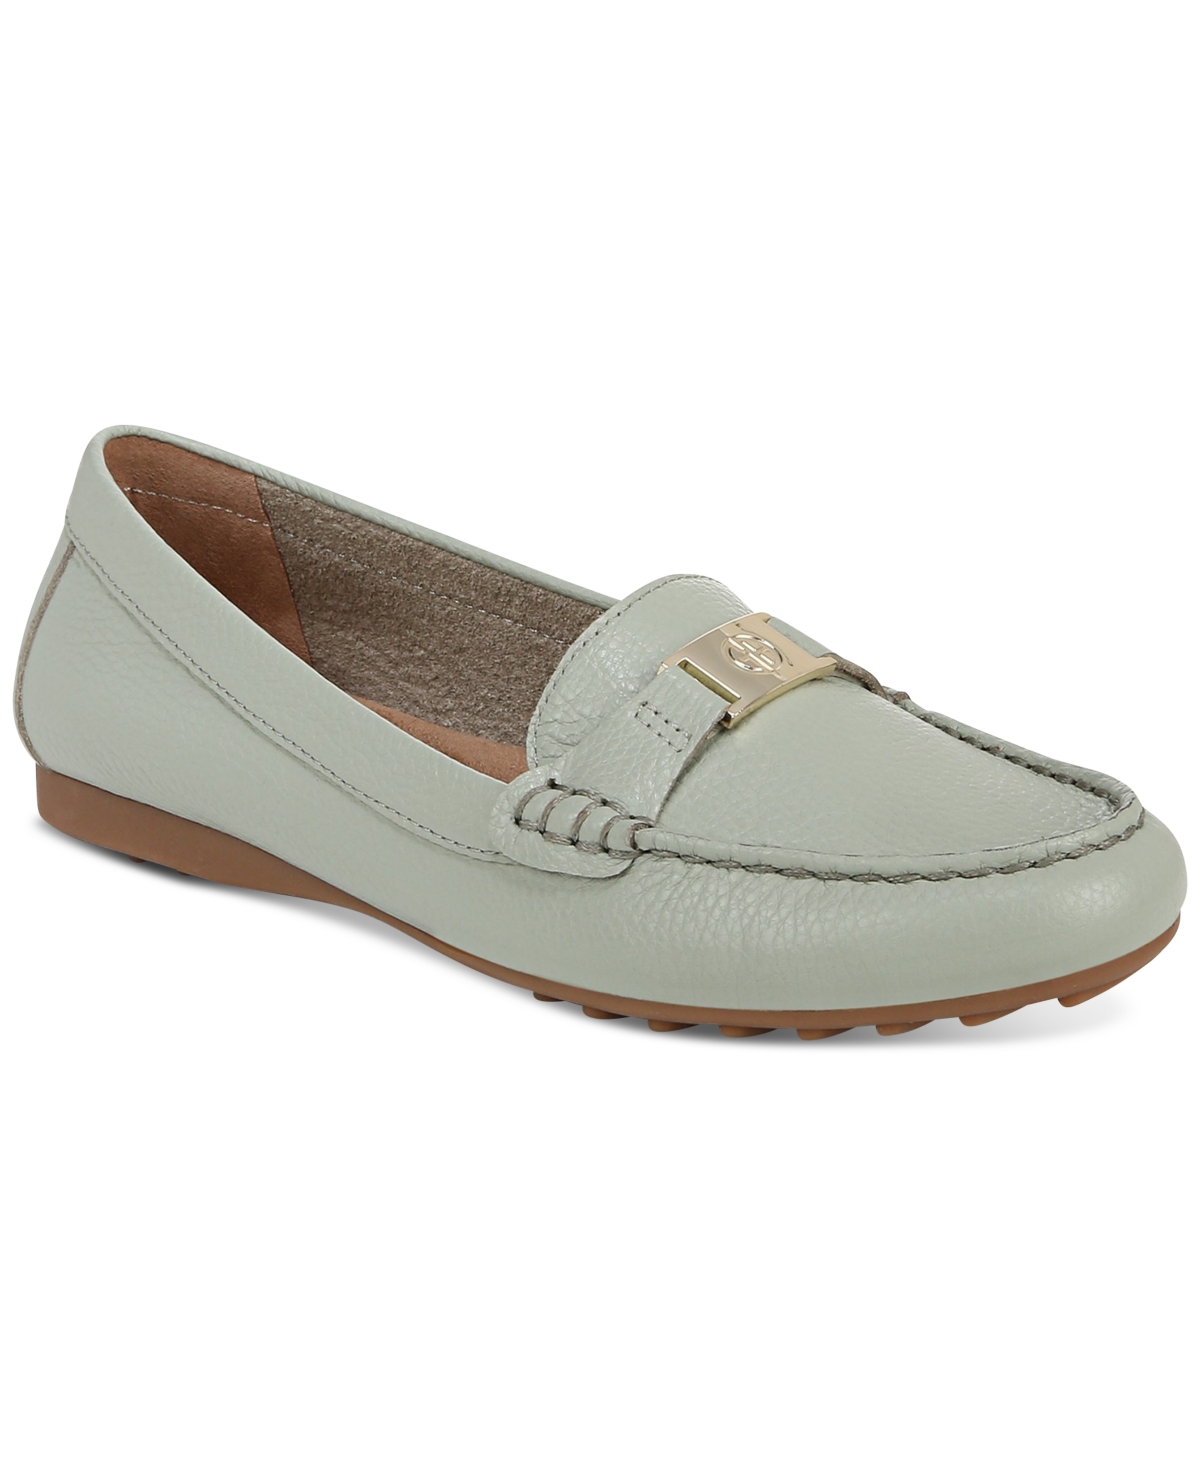 Women's Dailyn Memory Foam Slip On Loafers, Created for Macy's - Brown Leather